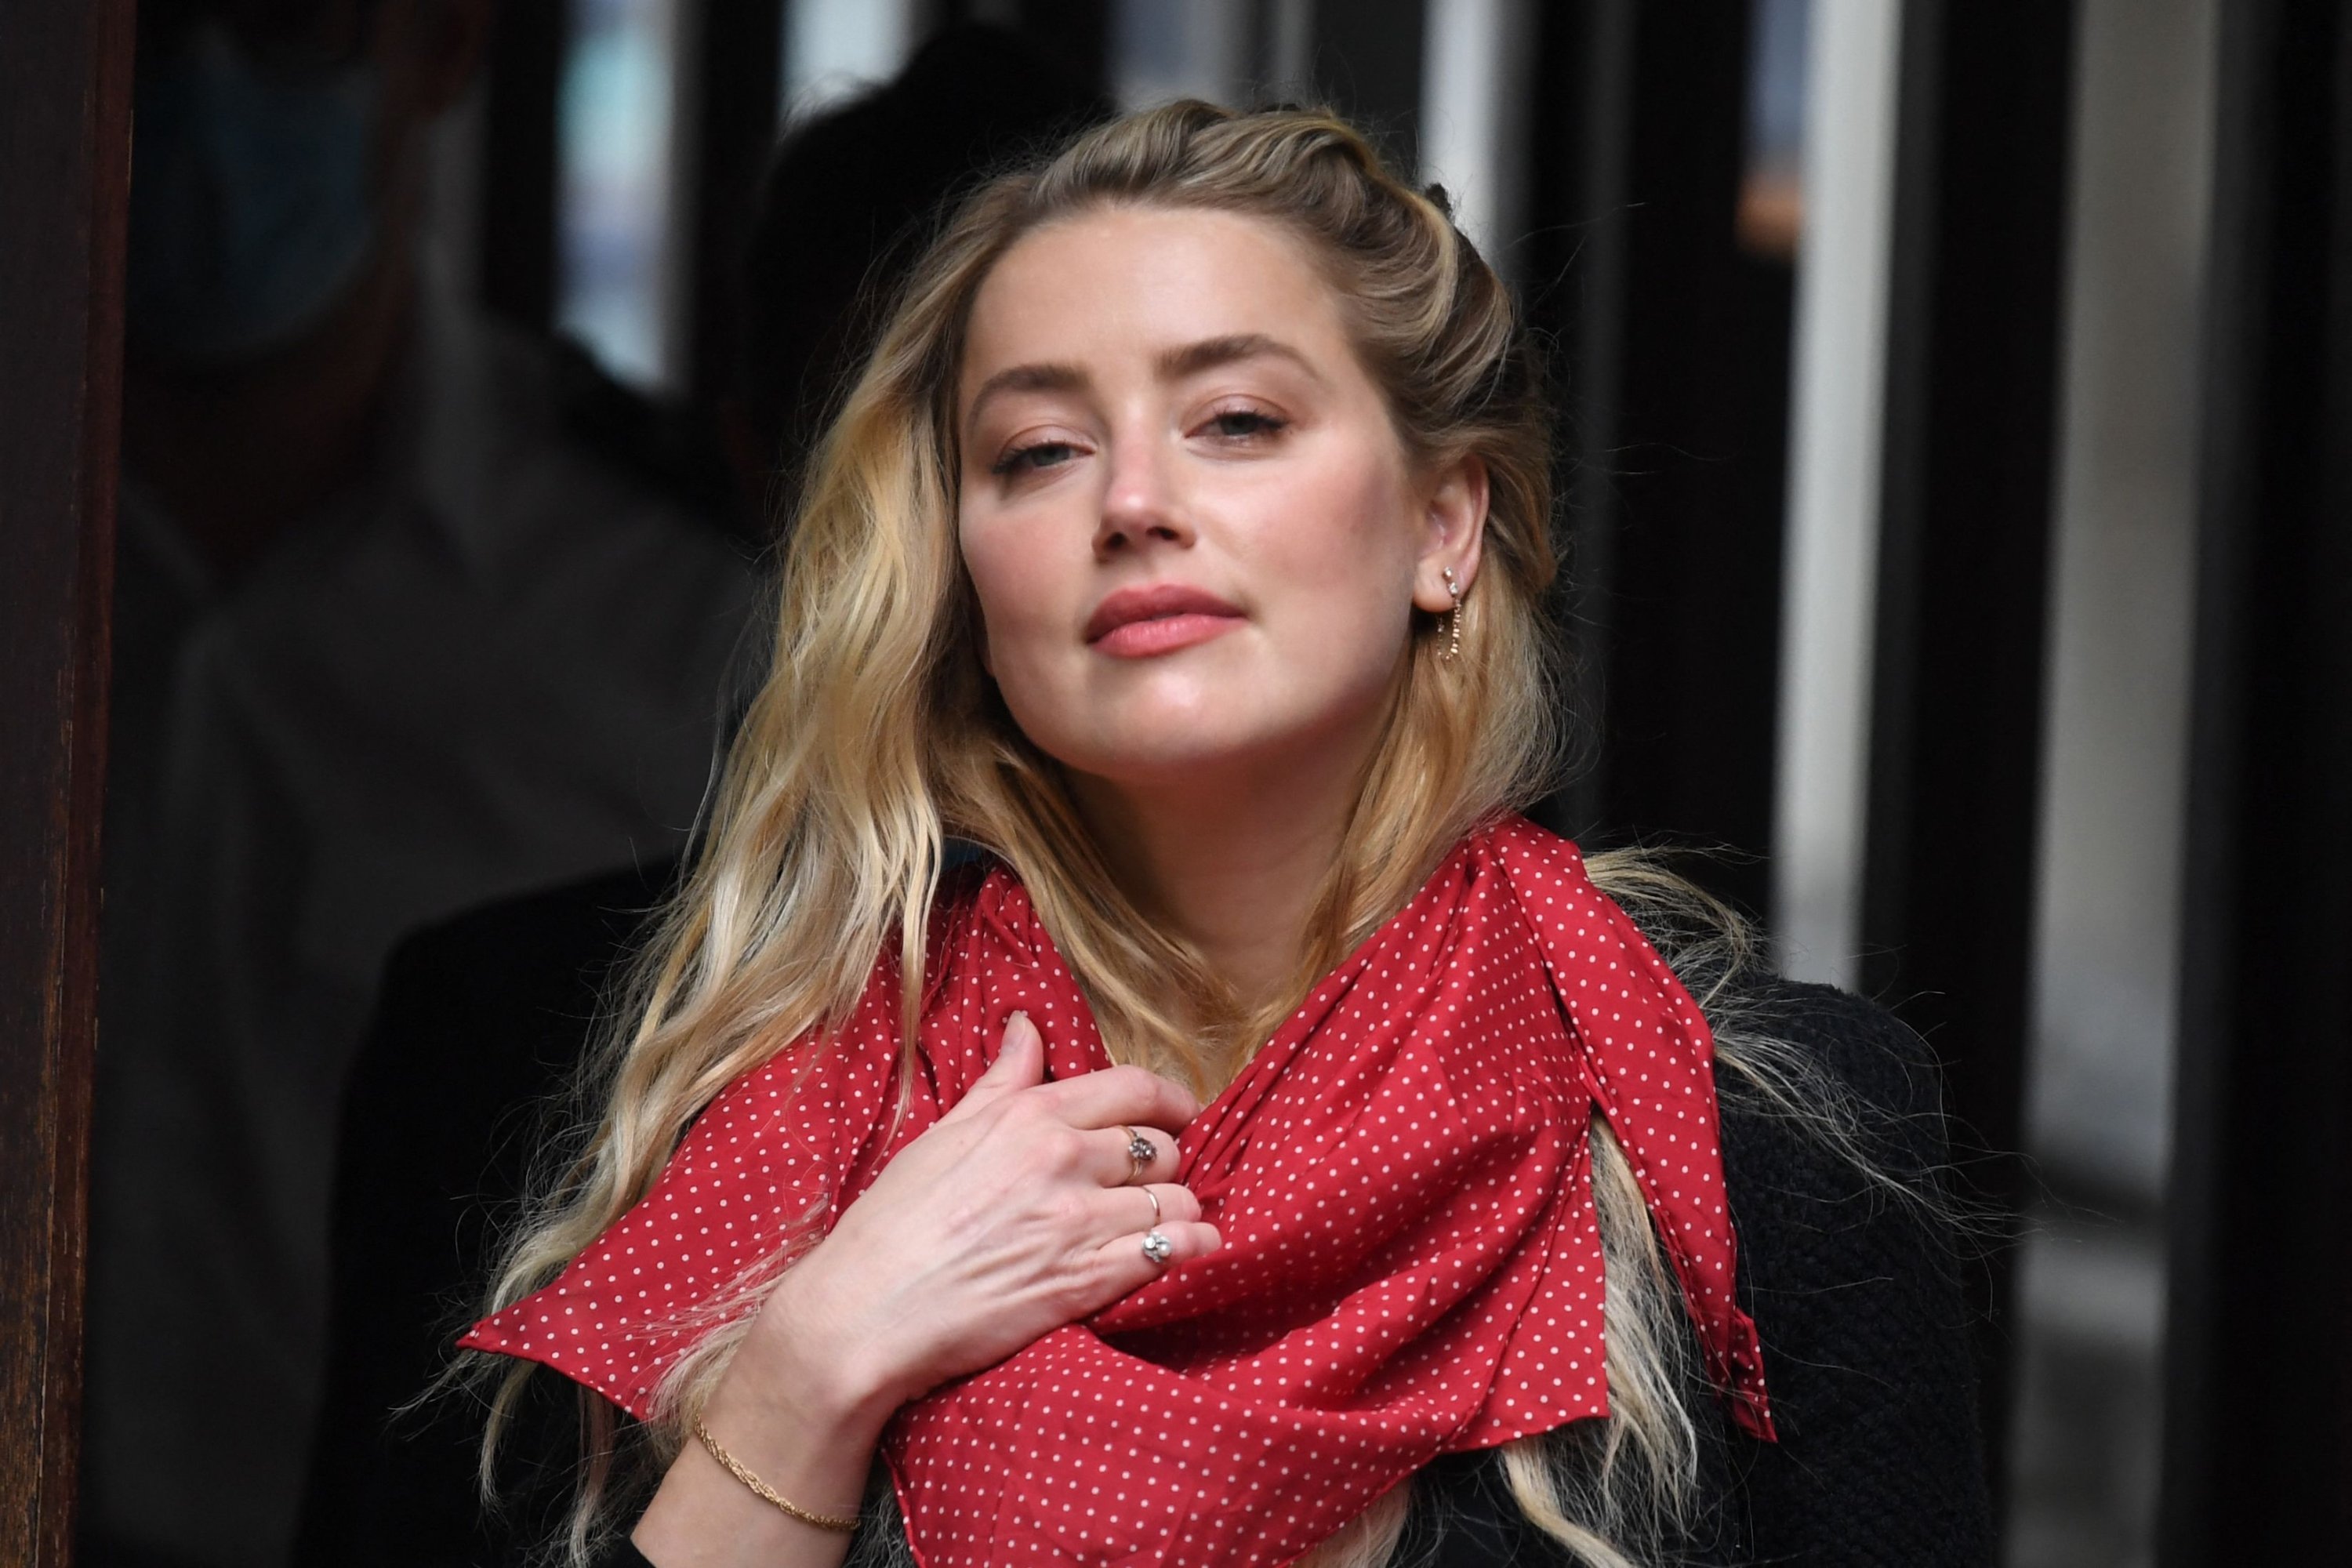 In this file photo taken on July 23, 2020 actress Amber Heard arrives on day thirteen of the libel trial by her former husband Johnny Depp against News Group Newspapers (NGN), at the High Court in London. (AFP Photo)